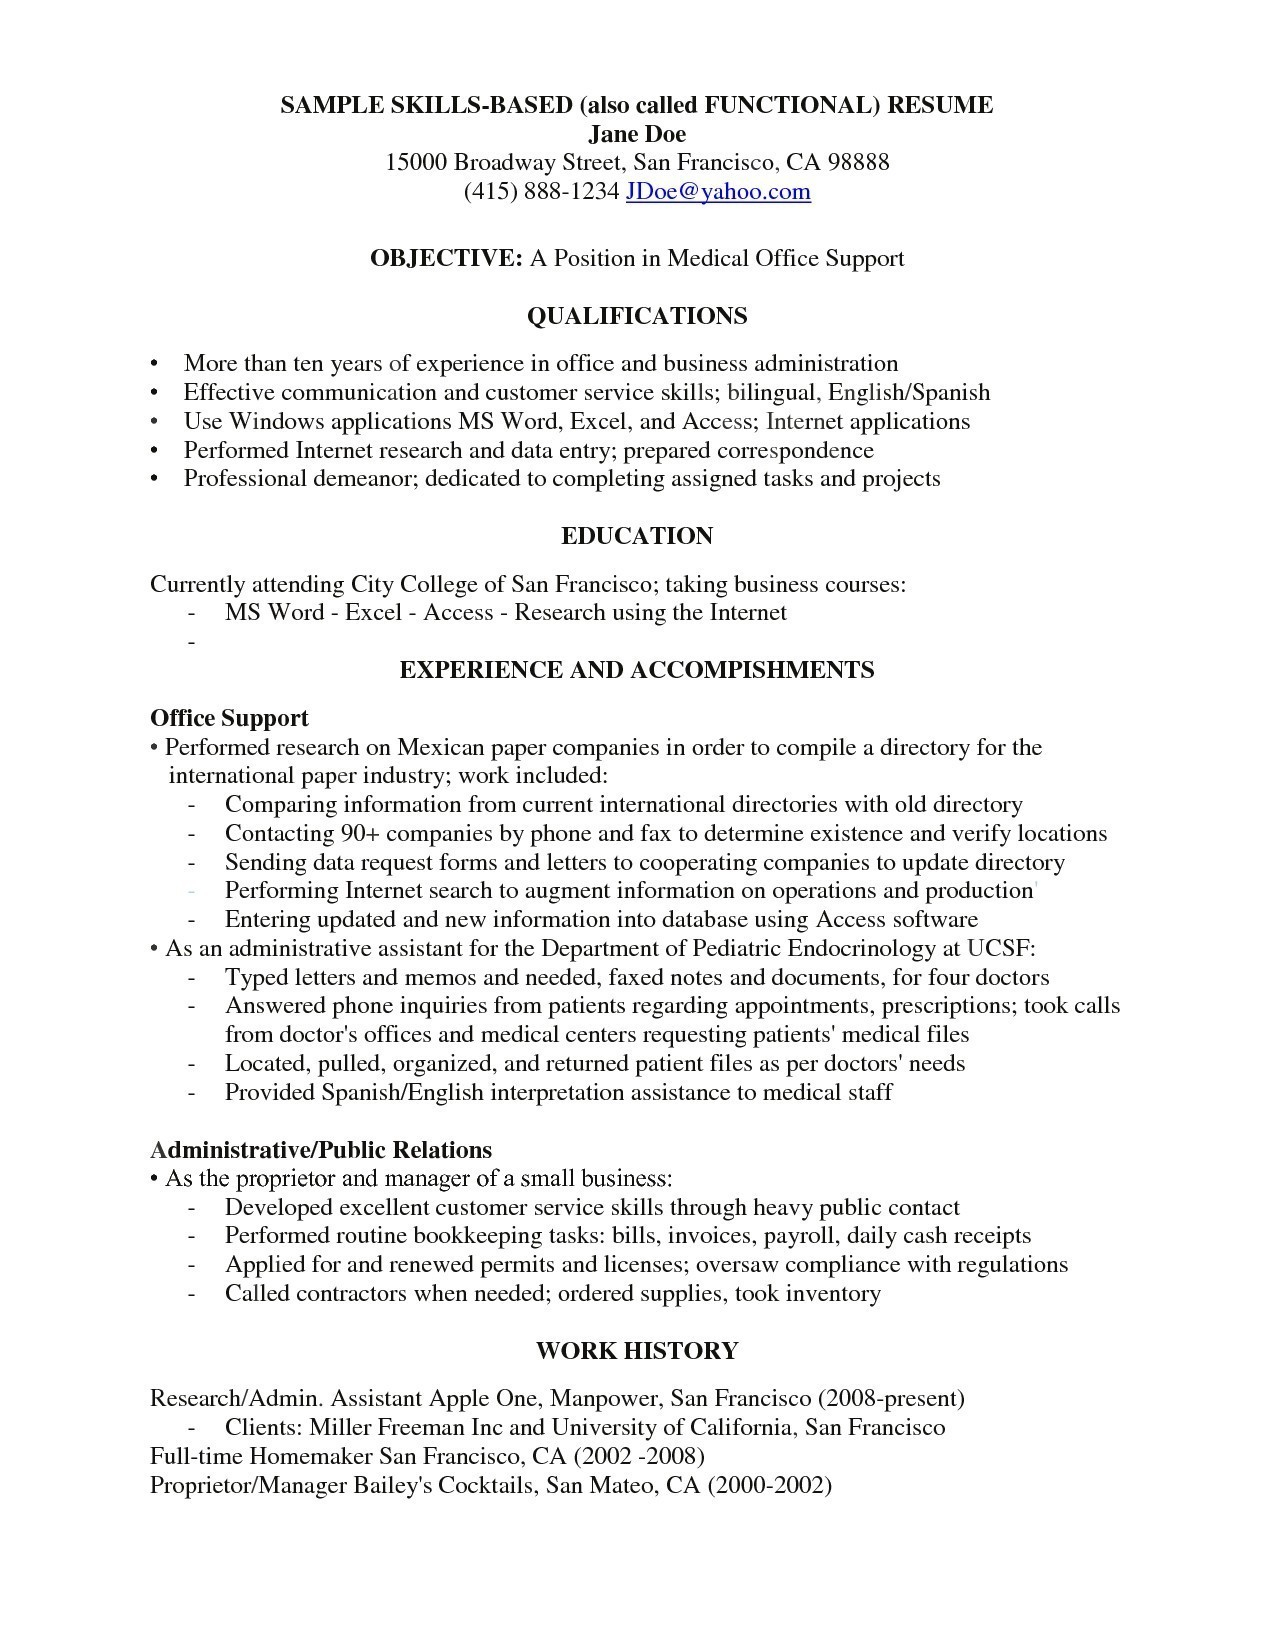 Resume Objective Examples  12 Caregiver Resume Objective Examples Samples Resume Database